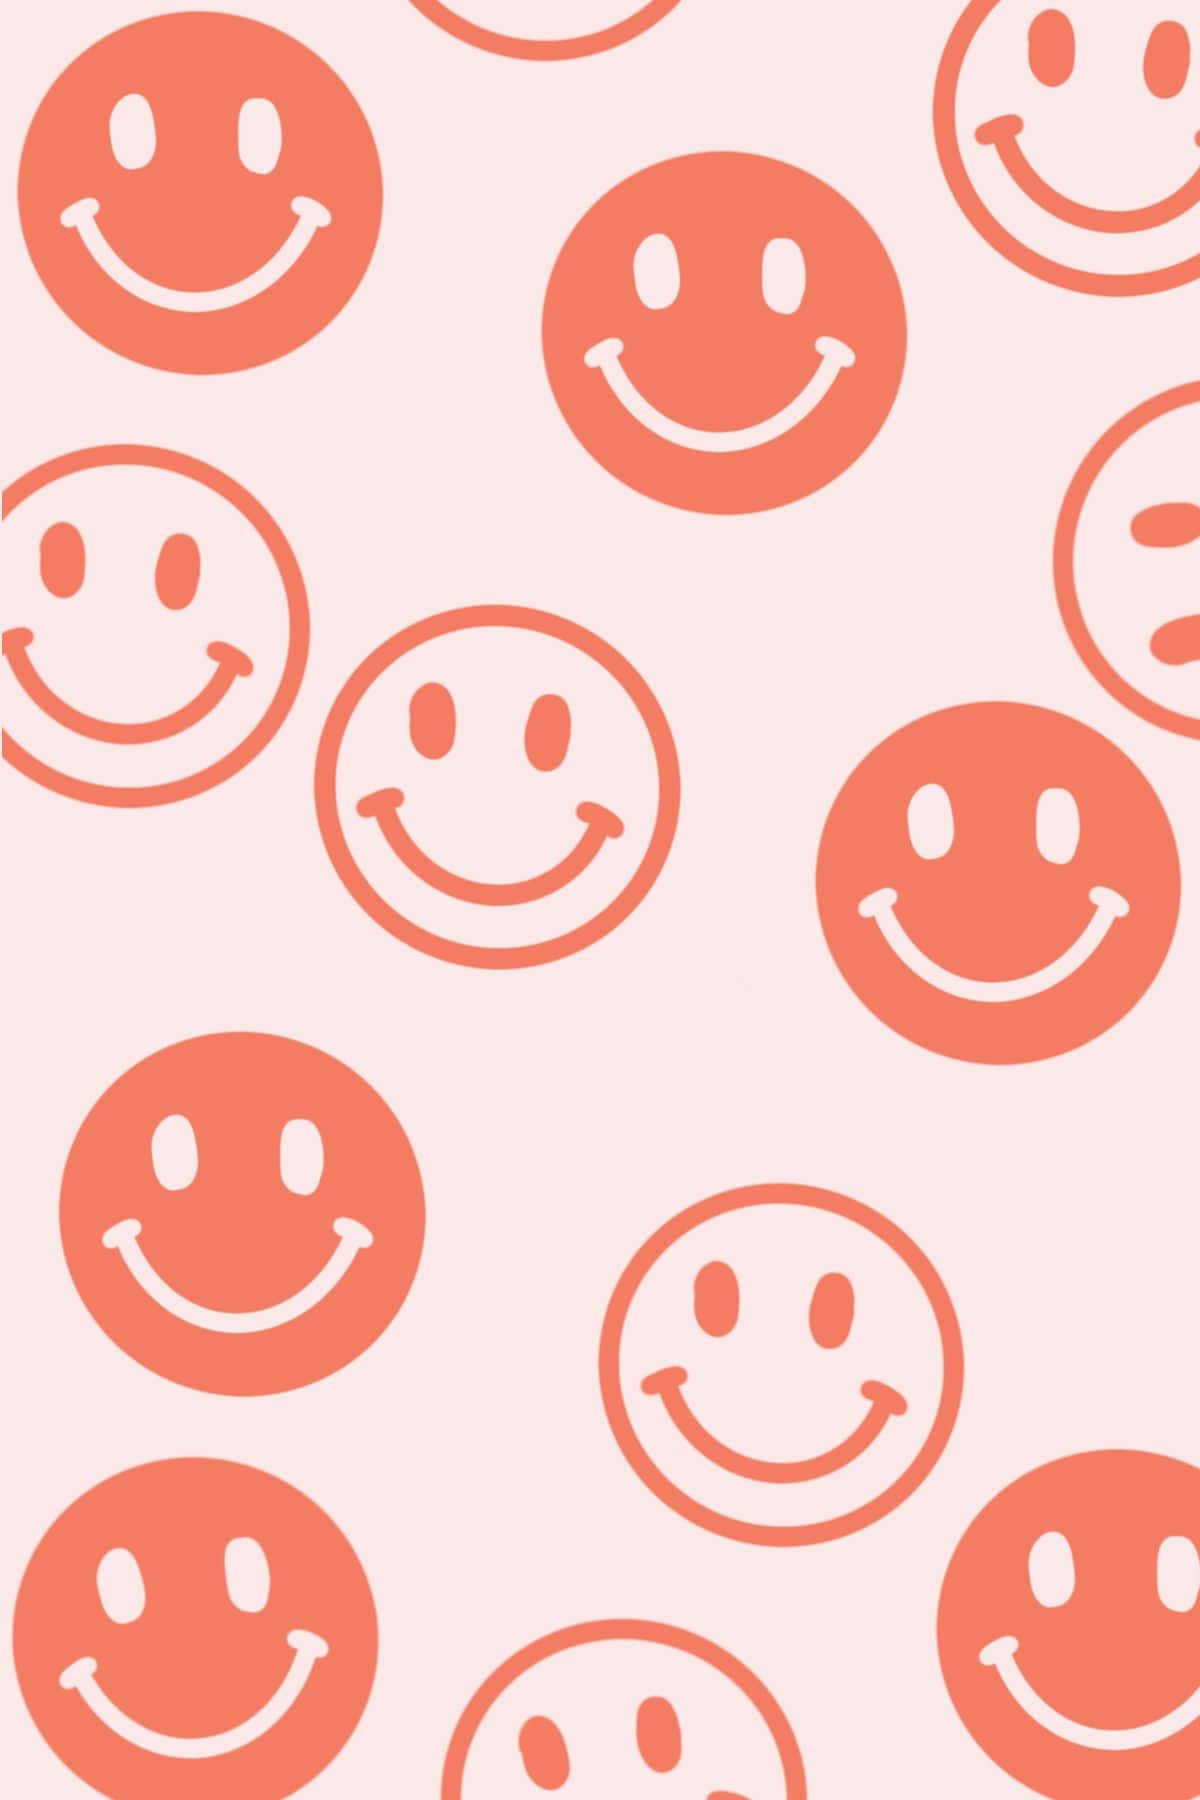 Cute Pink Happy Smile Face Wallpaper